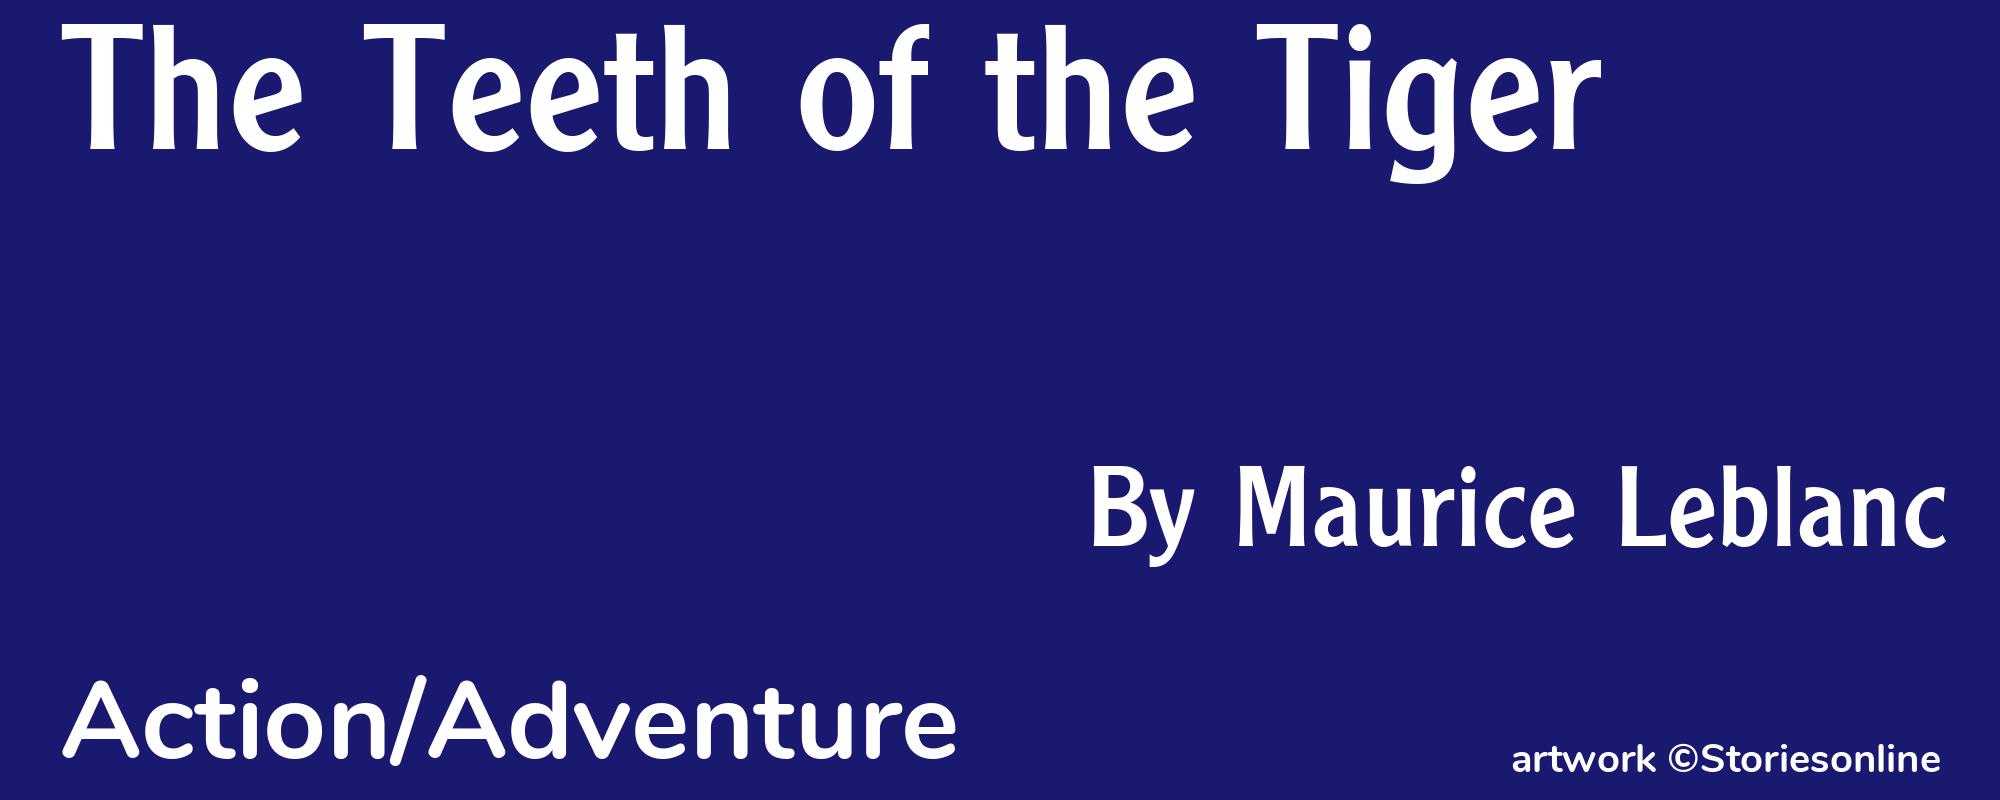 The Teeth of the Tiger - Cover